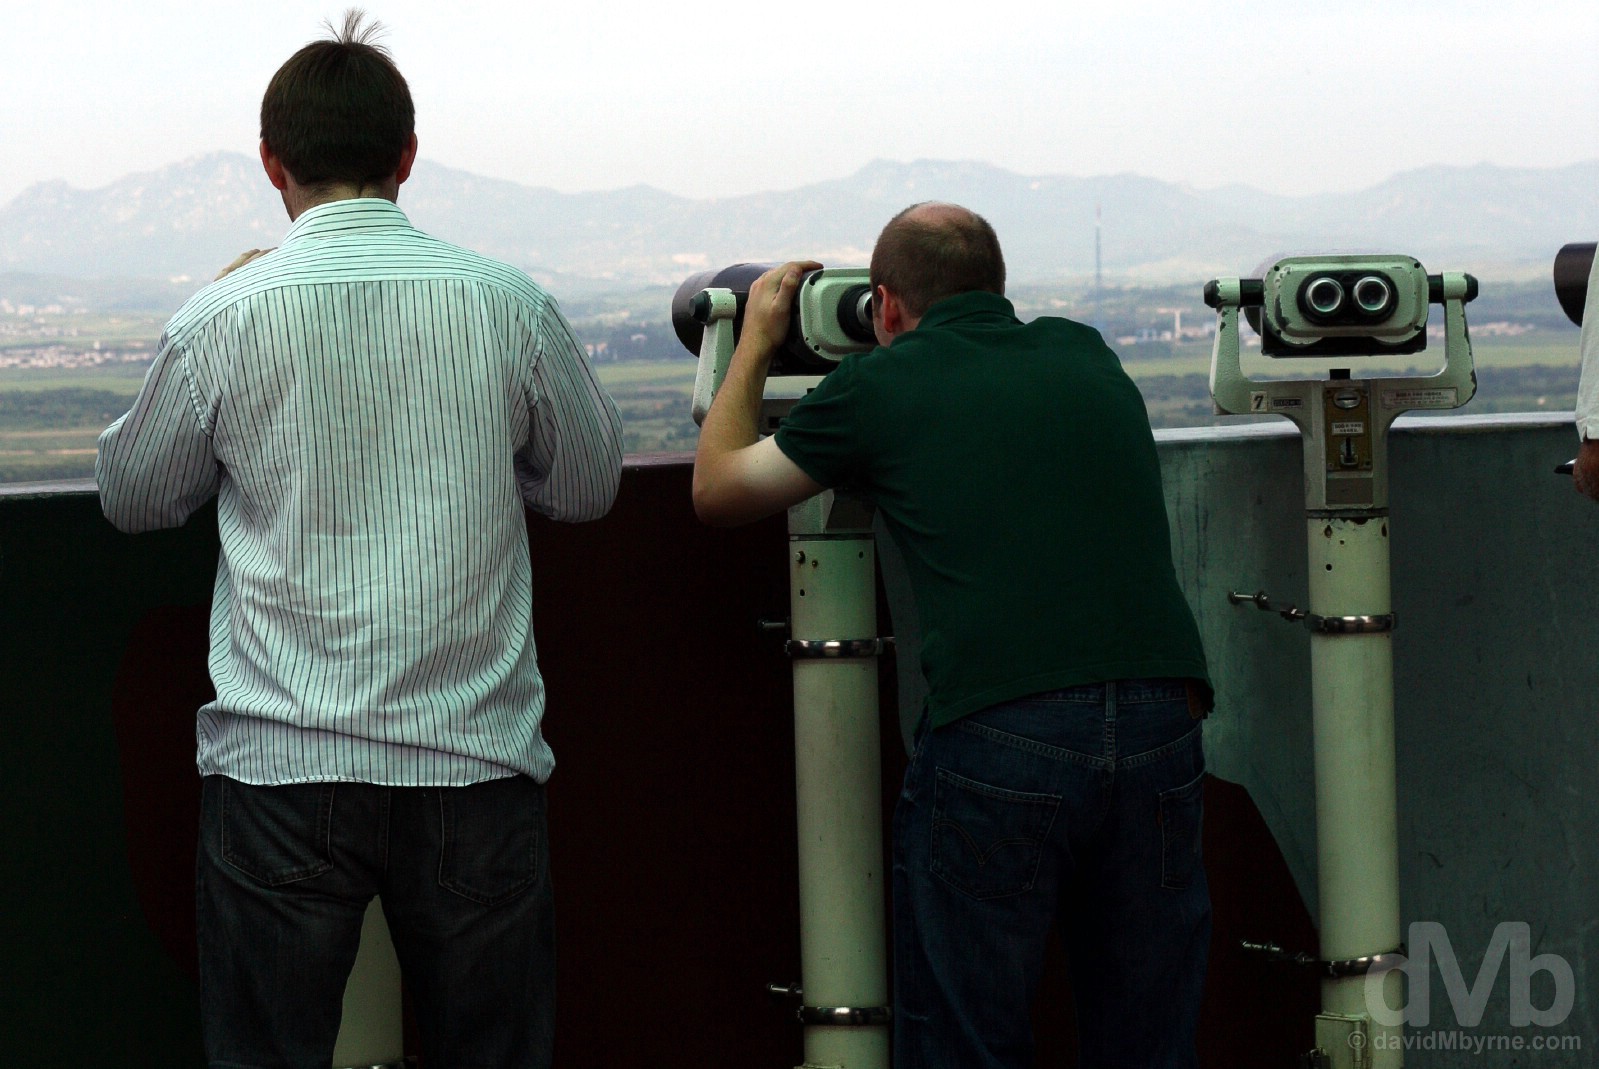 Peering into North Korea from the Dora Observatory of the Demilitarized Zone (DMZ), South Korea. August 21, 2009.